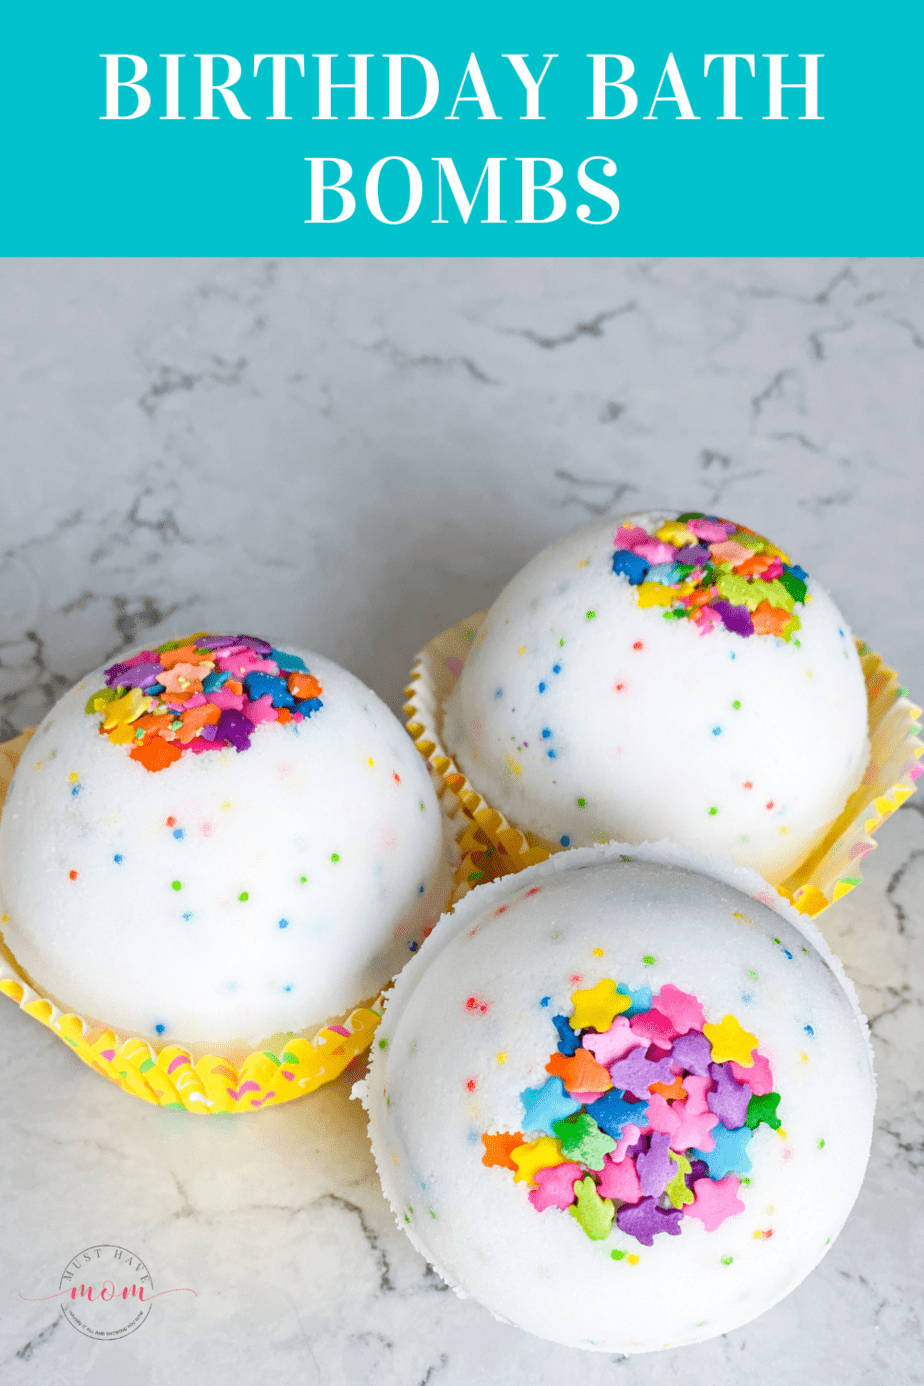 The best birthday bath bombs using all-natural ingredients! These fizz beautifully in the bathtub and make your skin feel silky soft. Plus they have sprinkles! #MustHaveMom #bathbombs #kids #crafts #birthday